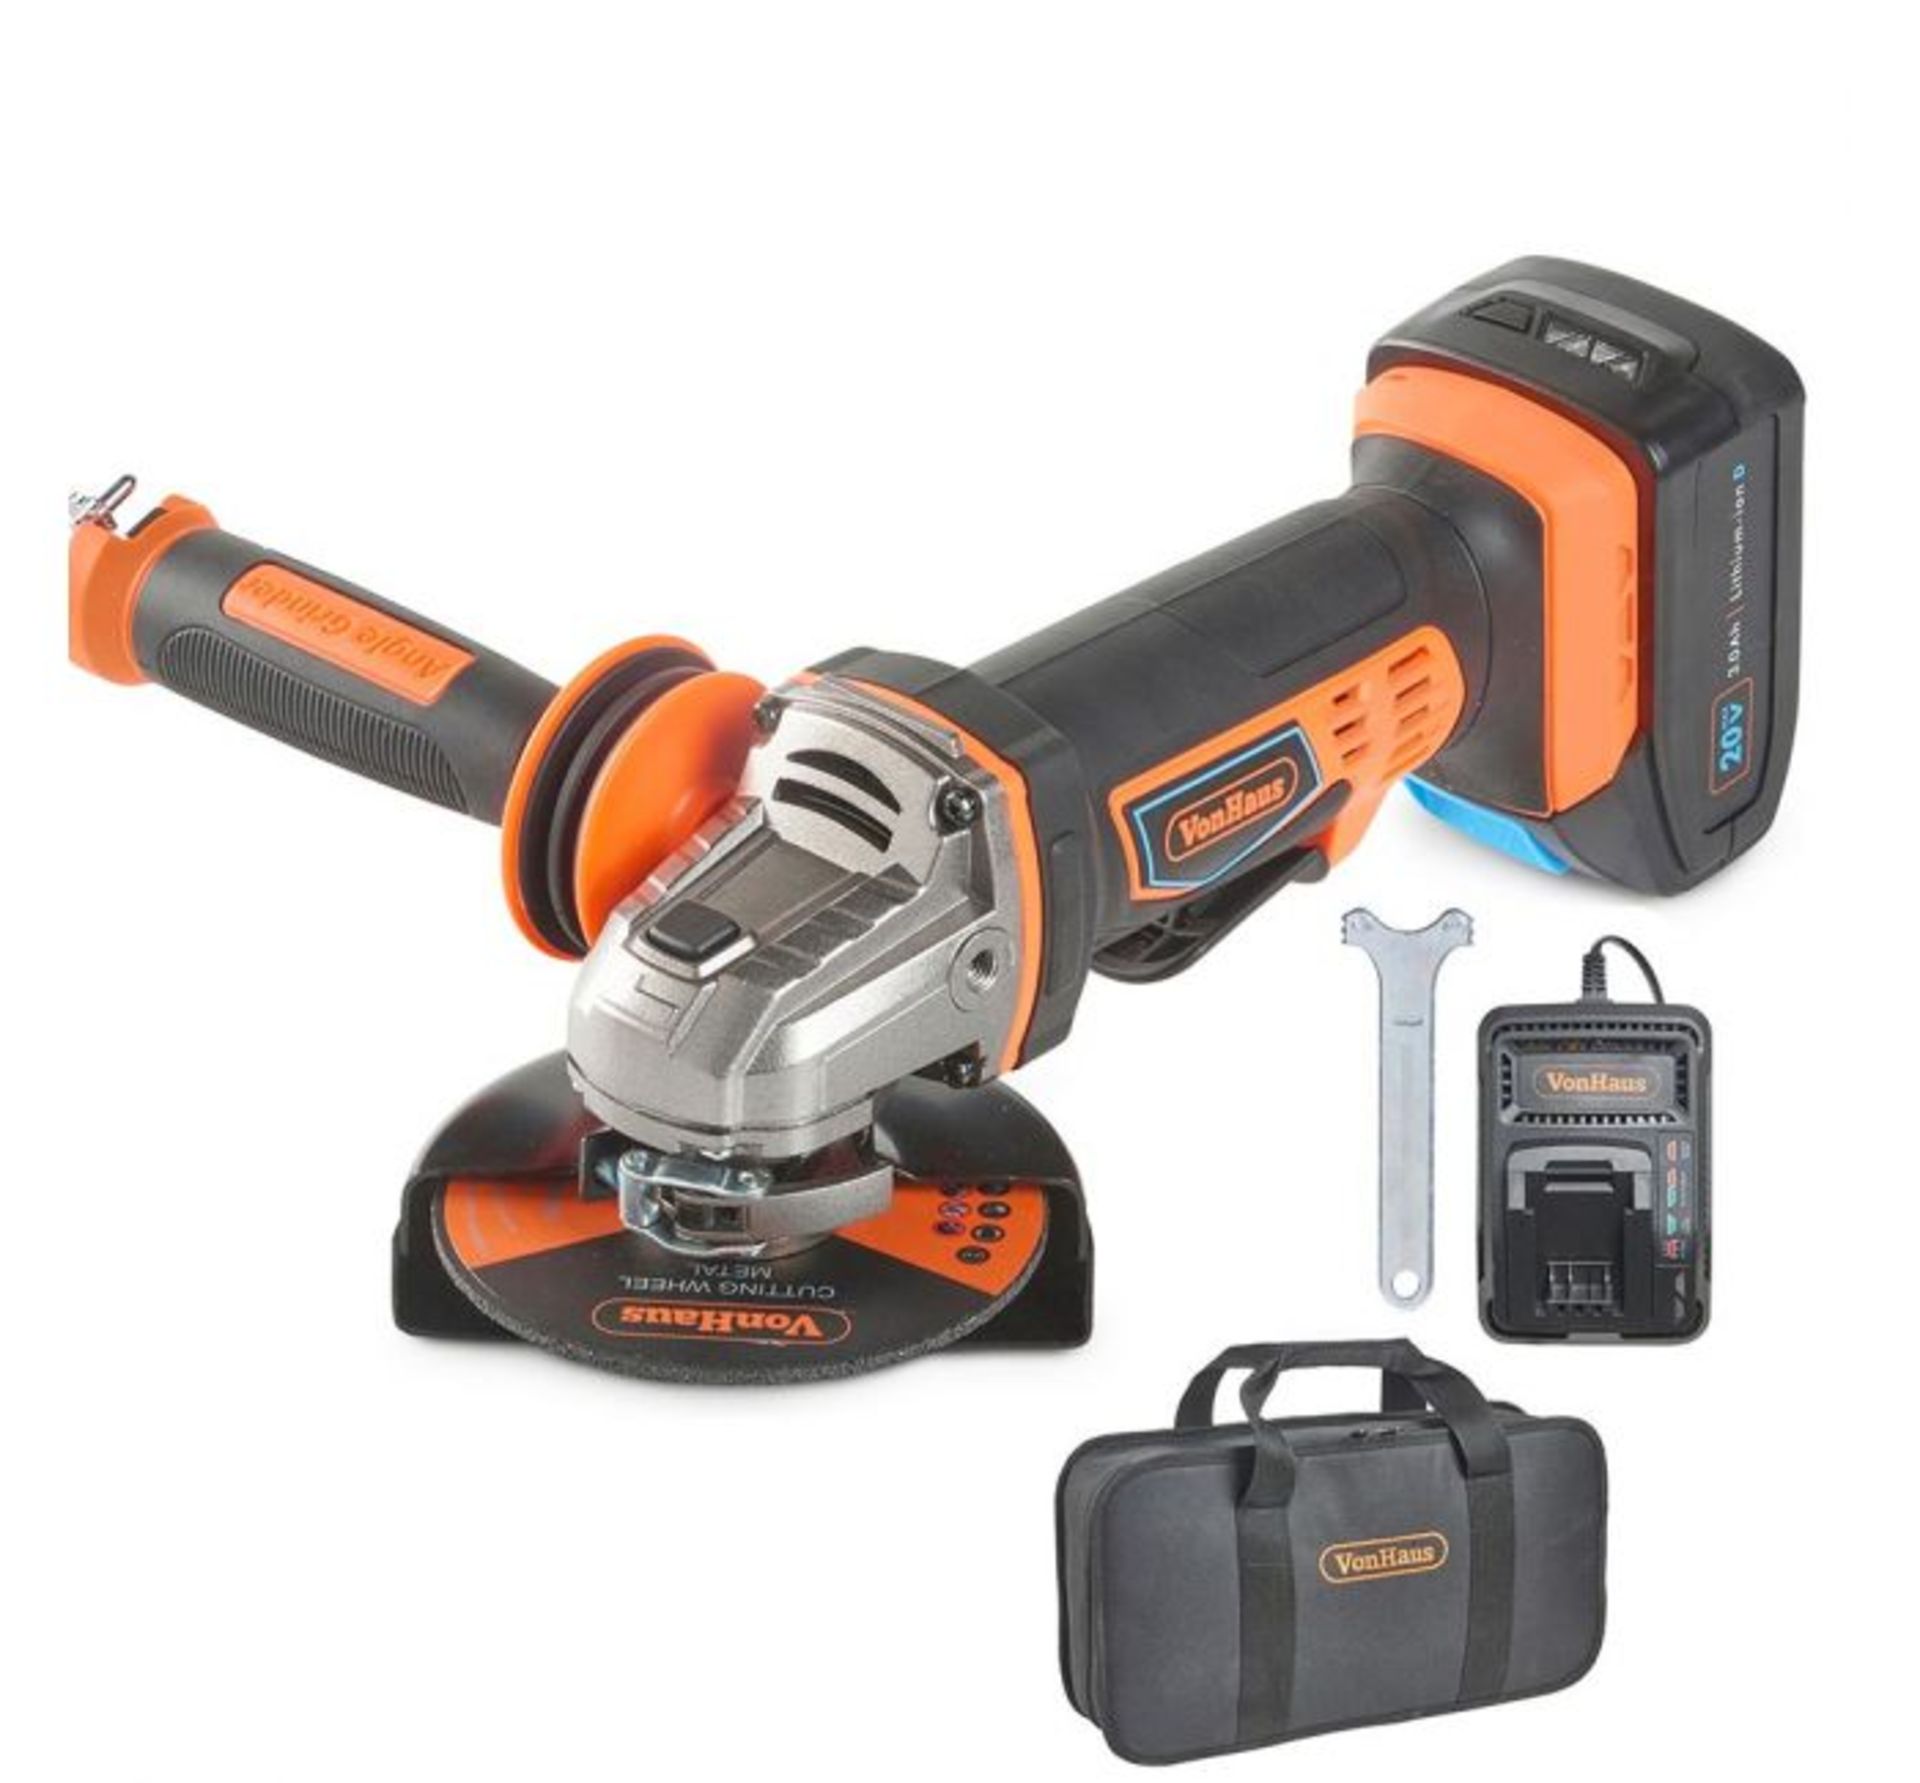 (GE86) 20V MAX Angle Grinder 20V Max 2Ah battery included is compatible with other tools in th... - Image 3 of 3